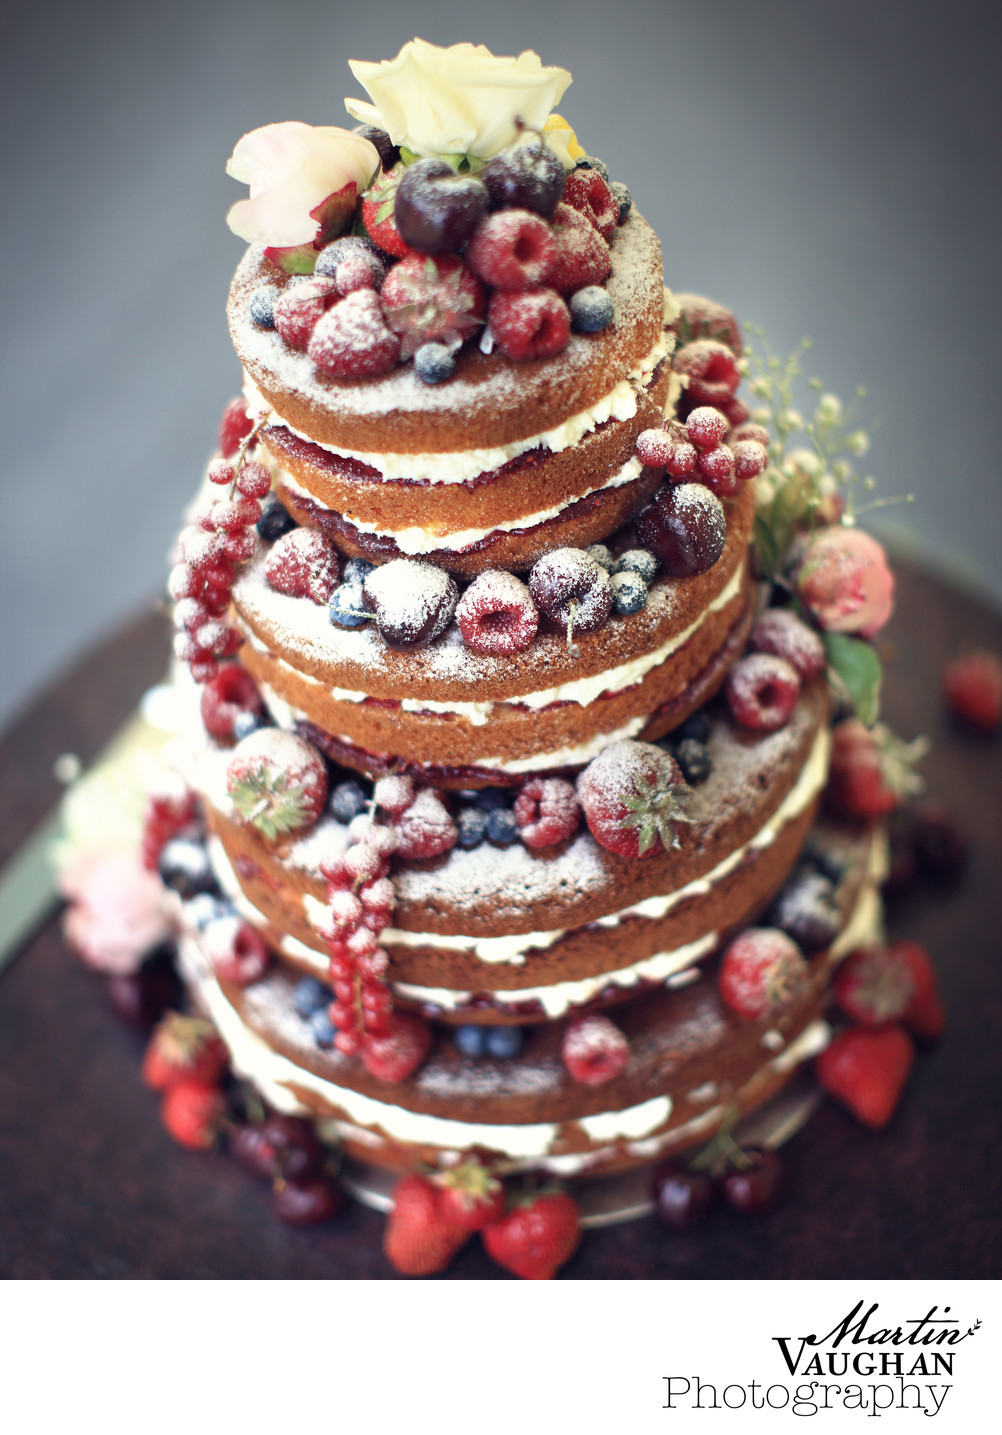 Fashionable naked cake photography by Martin Vaughan